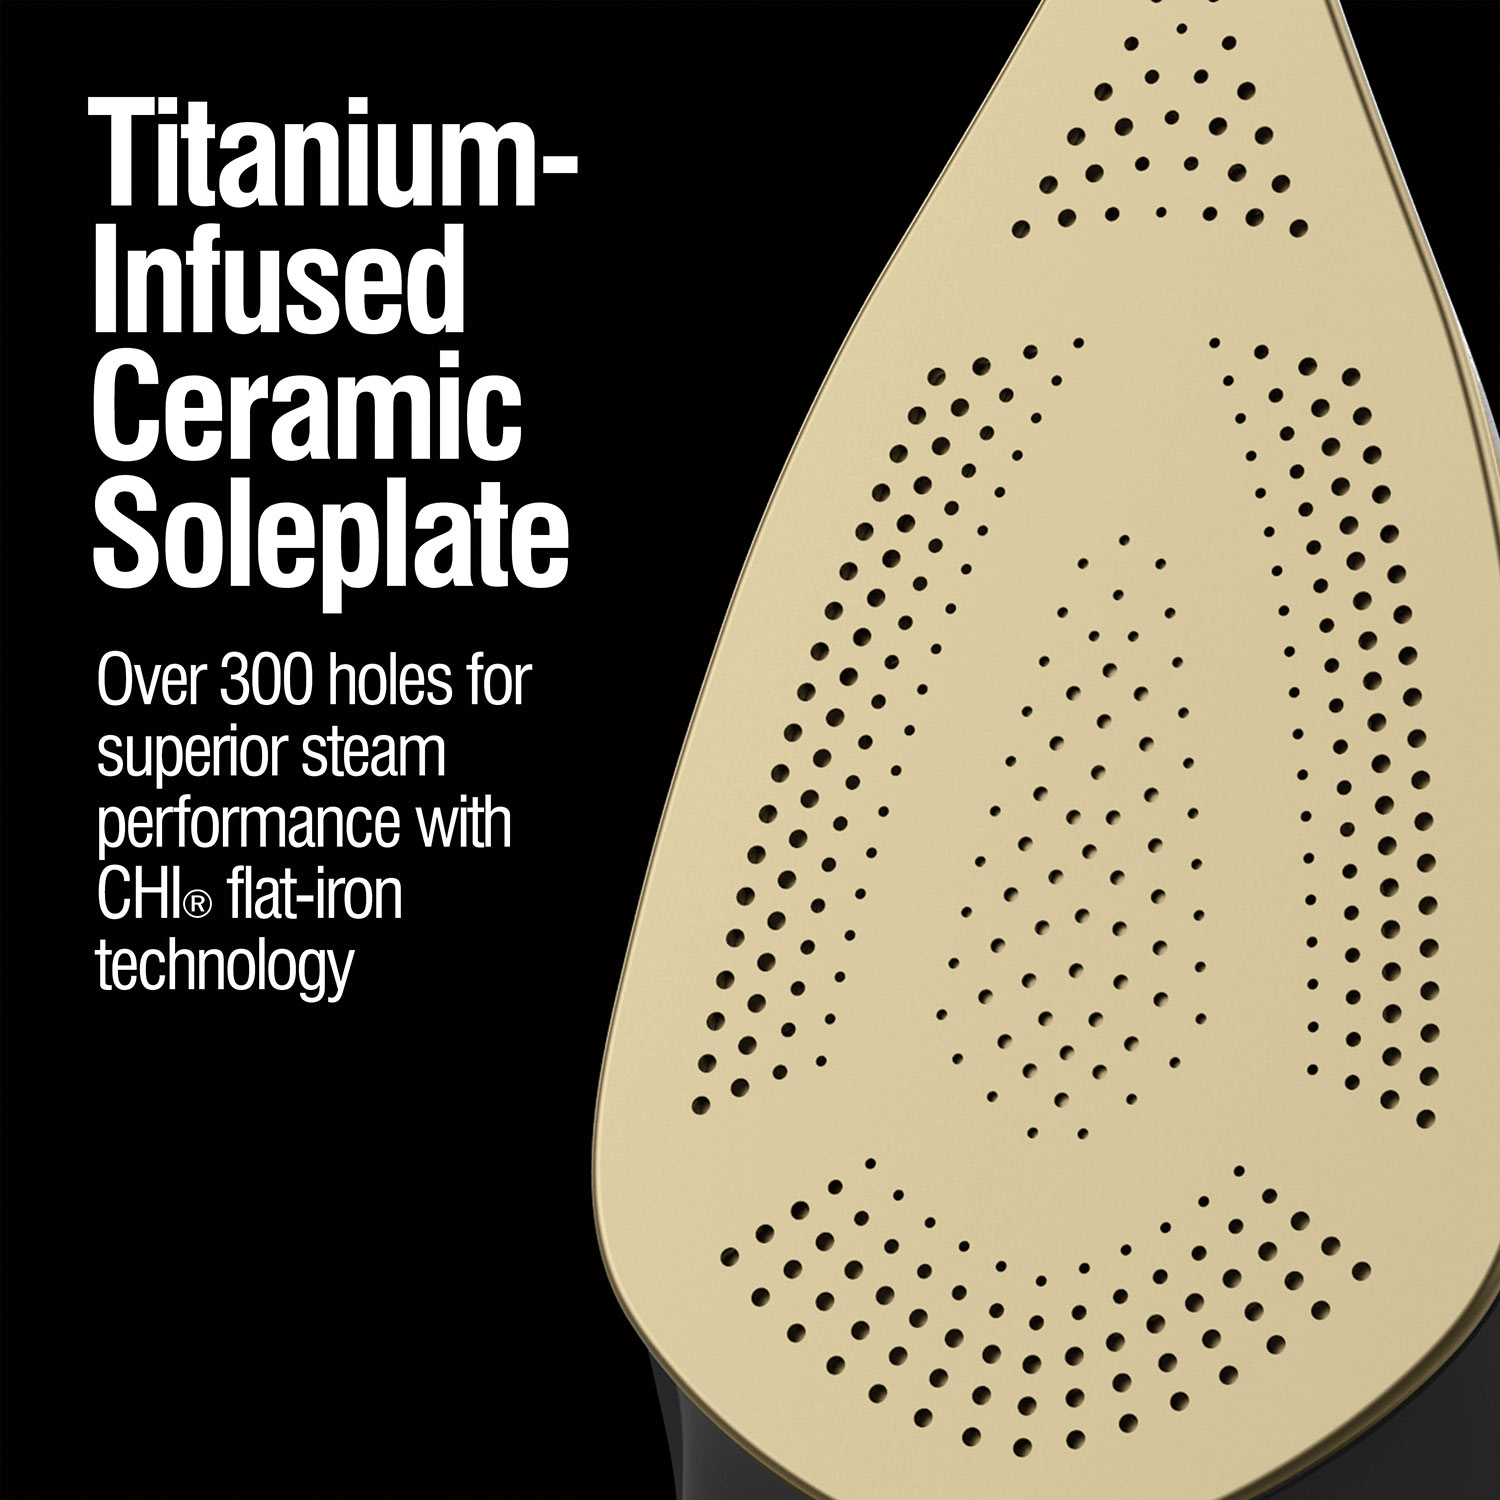 Titanium-infused ceramic soleplate with over 300 holes for superior steam performance with CHI flat-iron technology